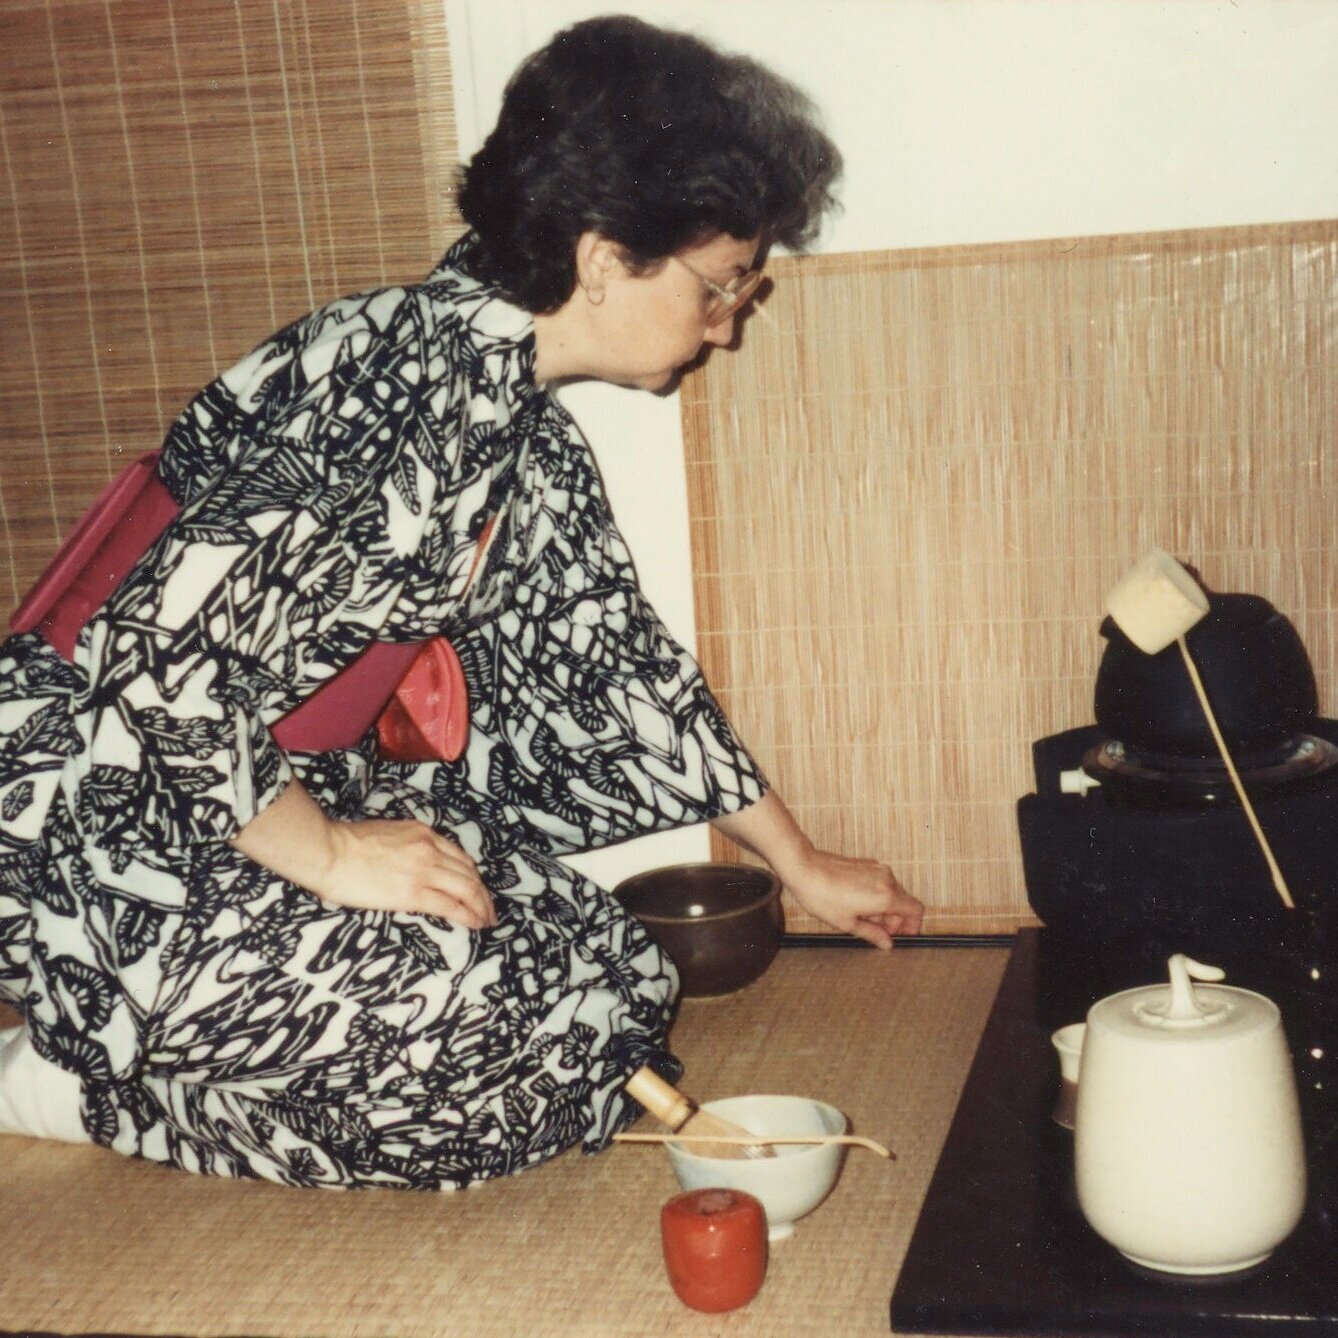 Practing tea ceremony at home, 1984